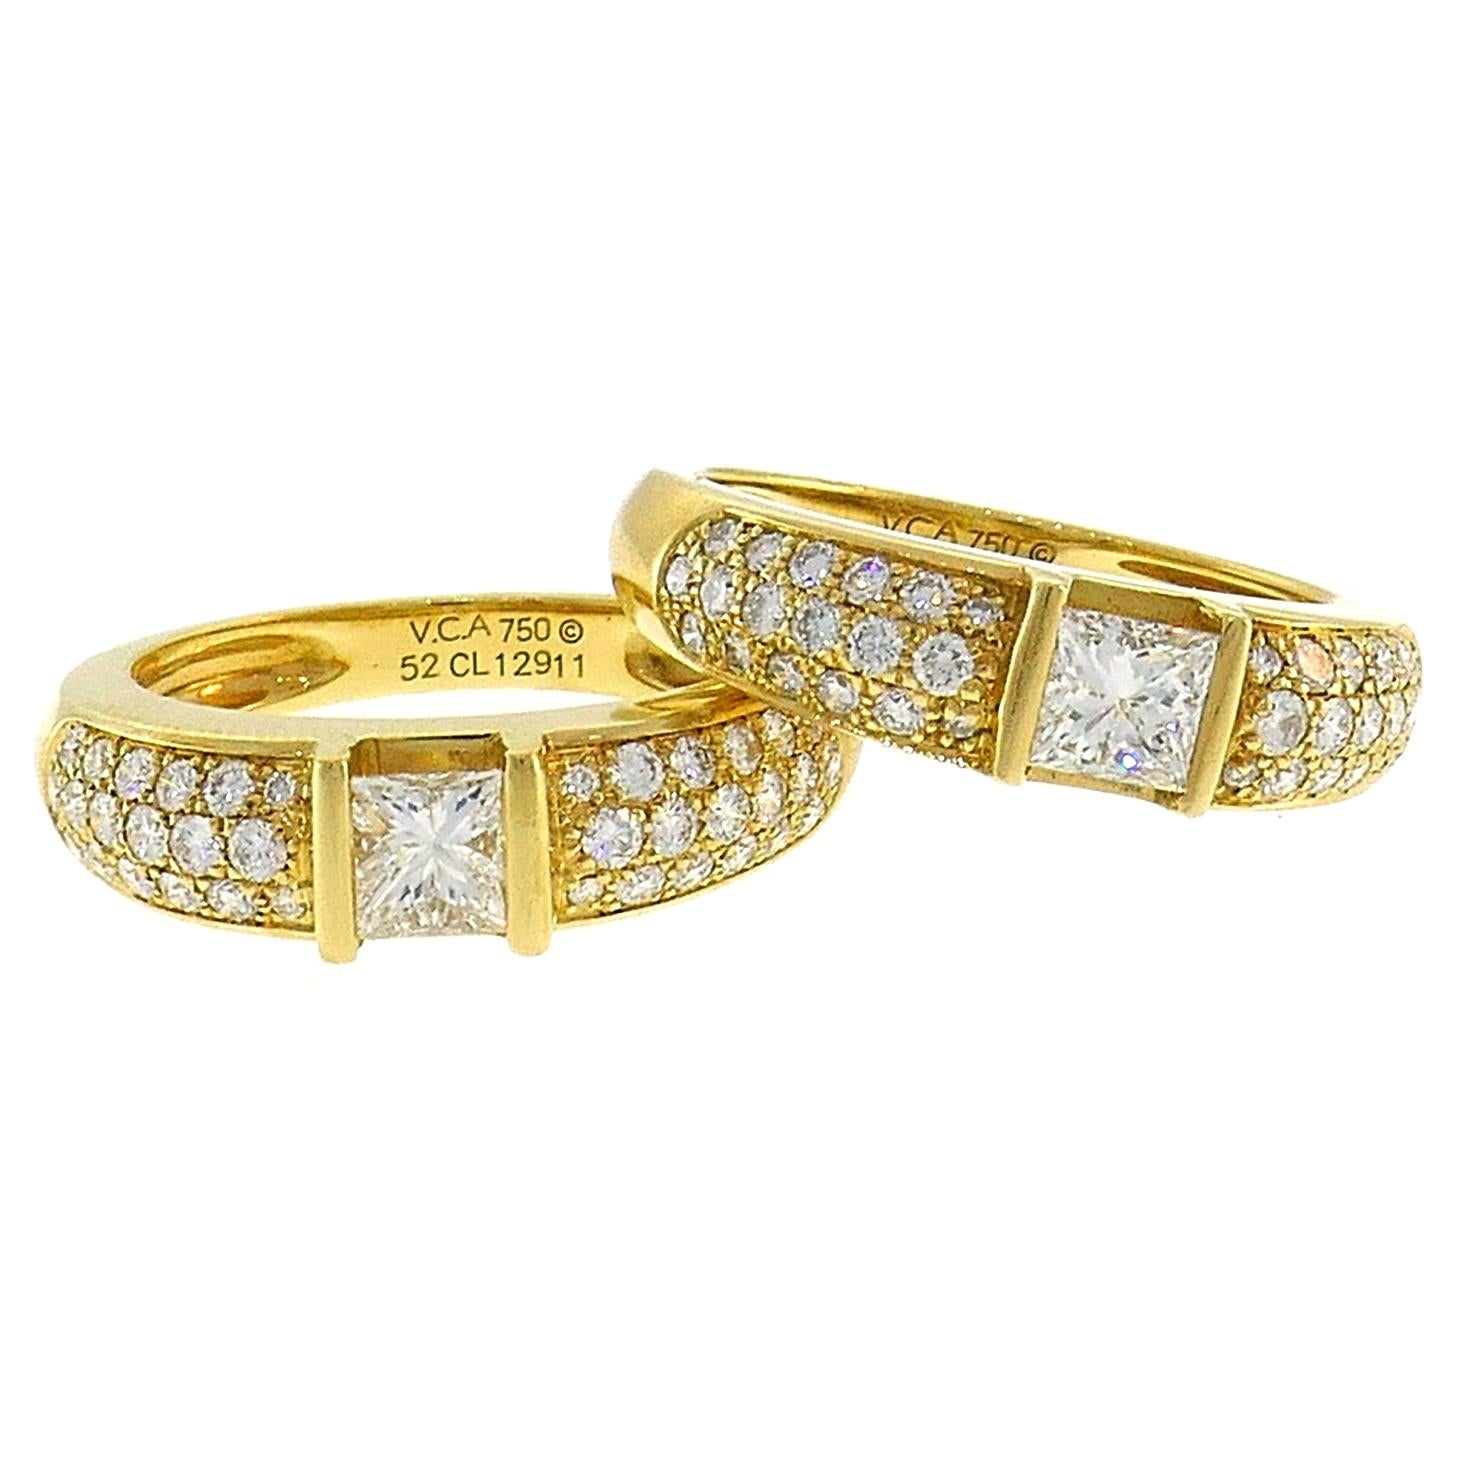 Van Cleef & Arpels Diamond Yellow Gold Band Ring Duo VCA